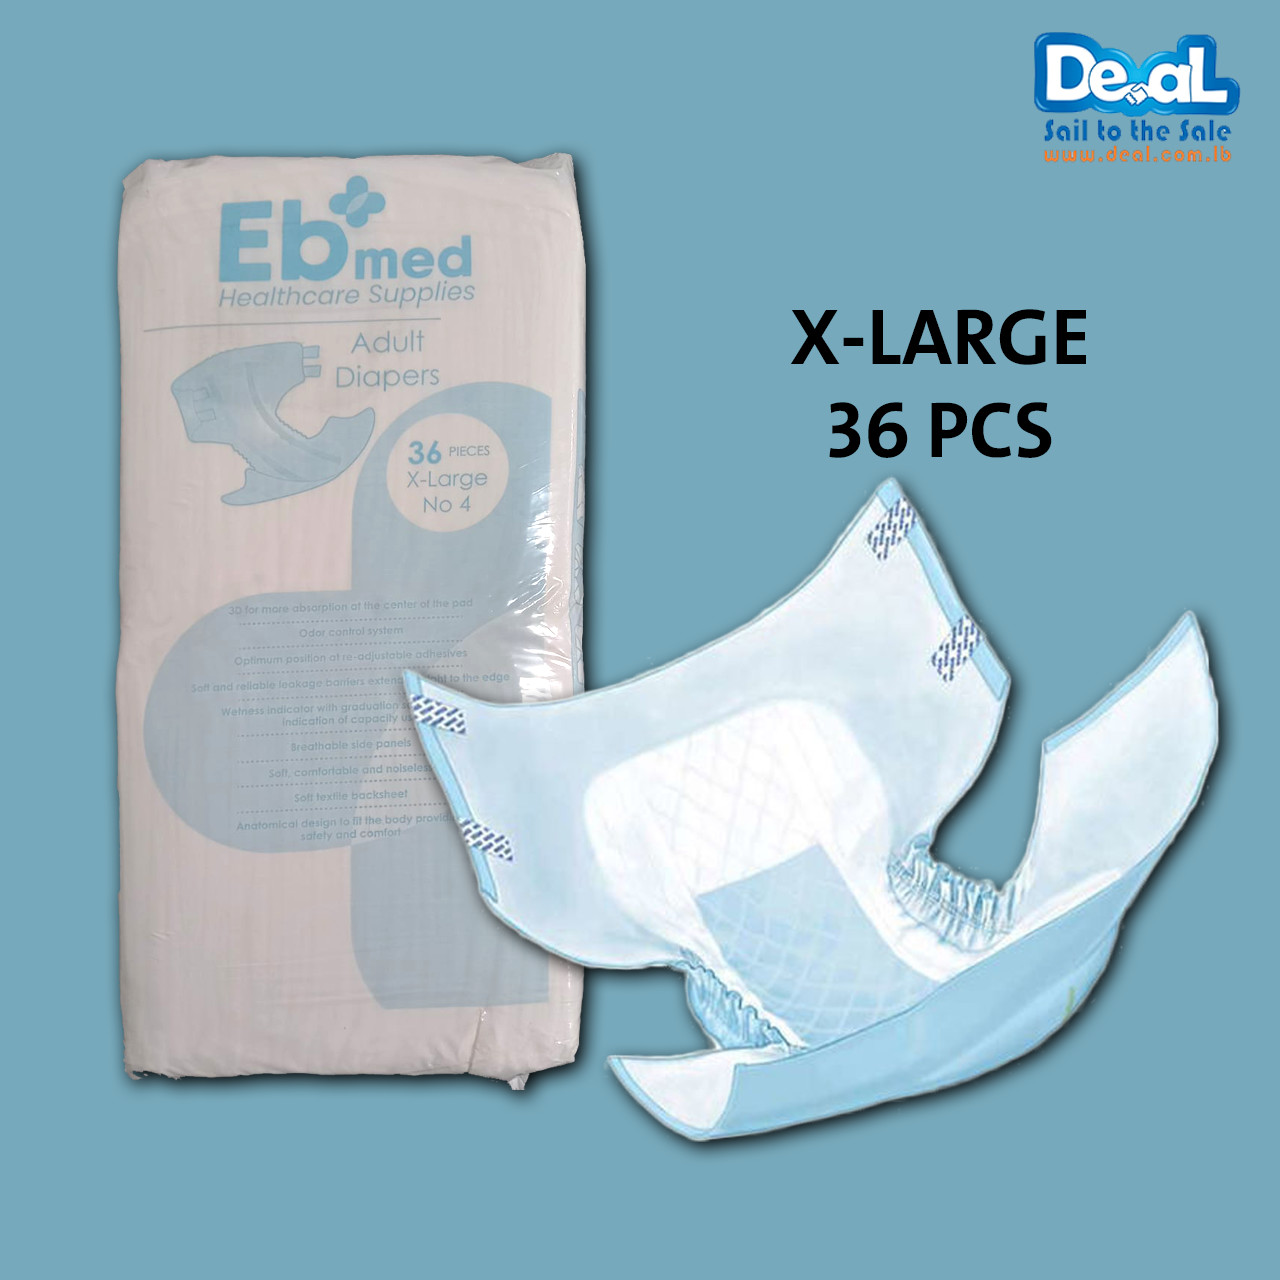 Eb med Adult Diapers 36 Pieces | X-Large Size